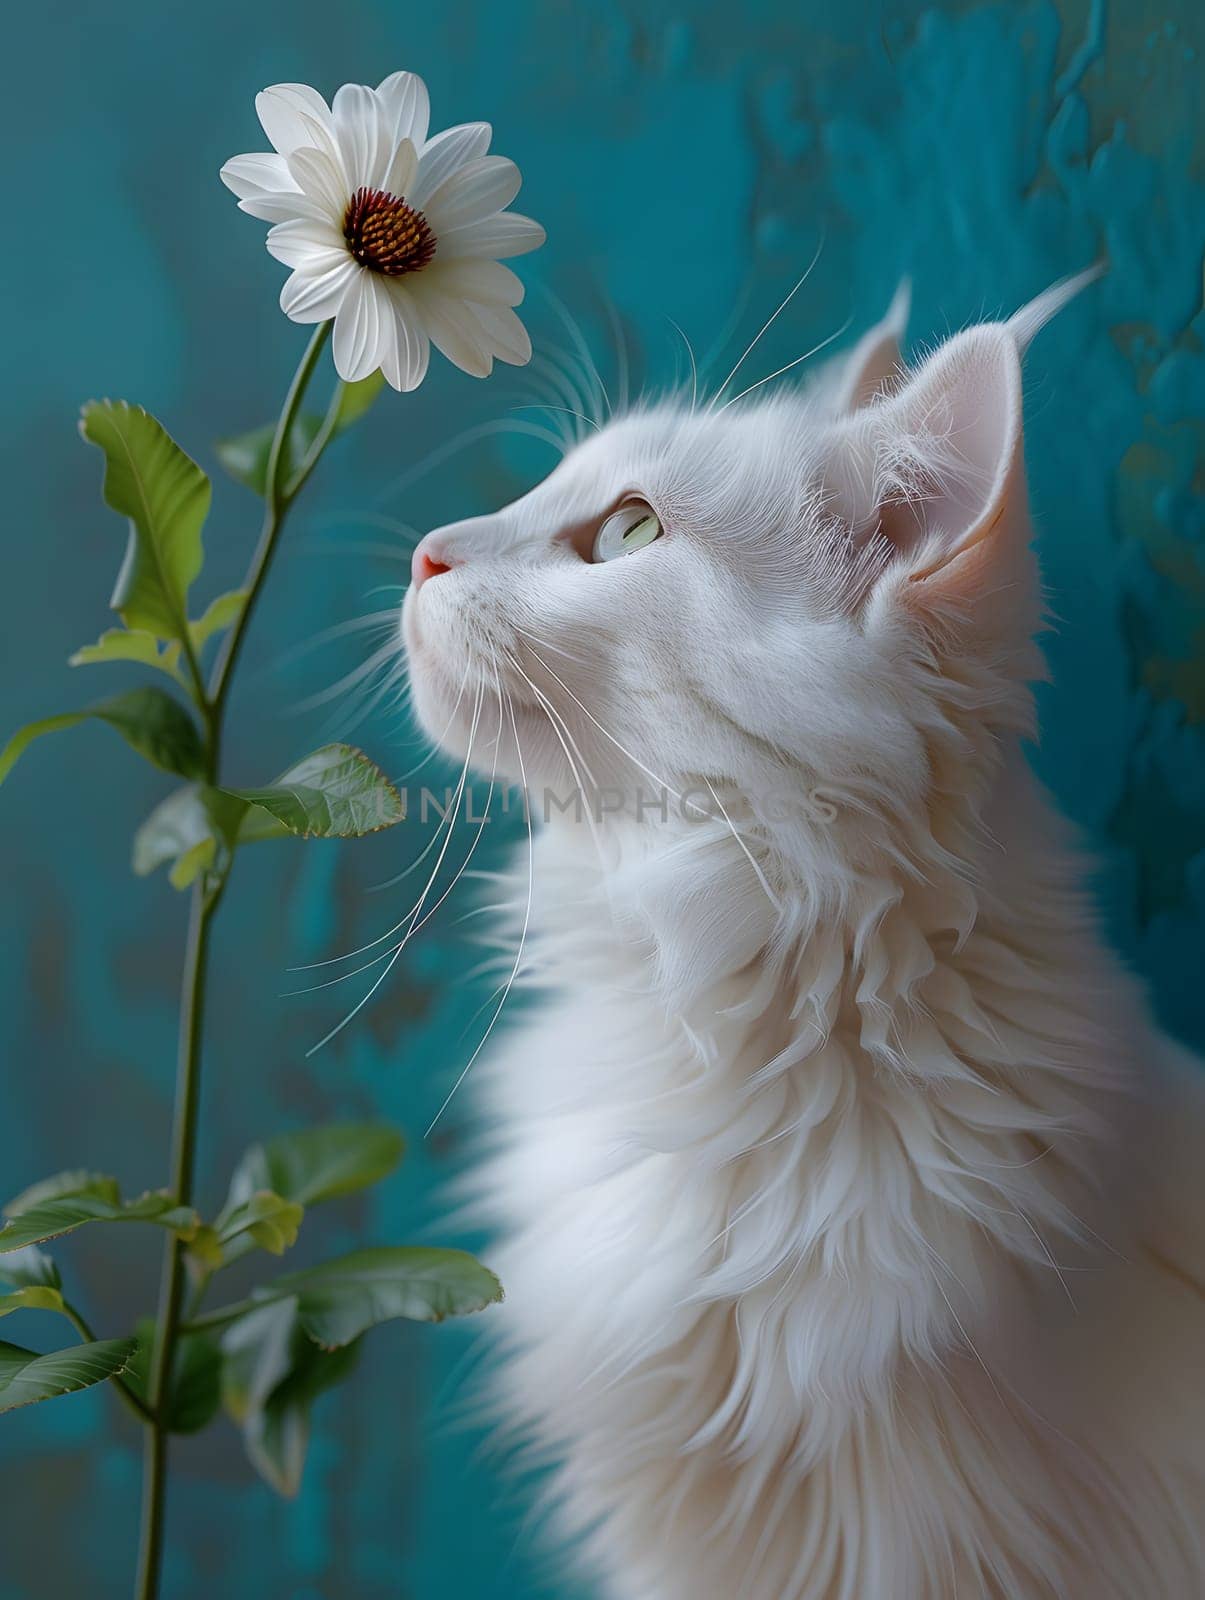 White Felidae sniffing a Petal of a Plant on blue background by Nadtochiy